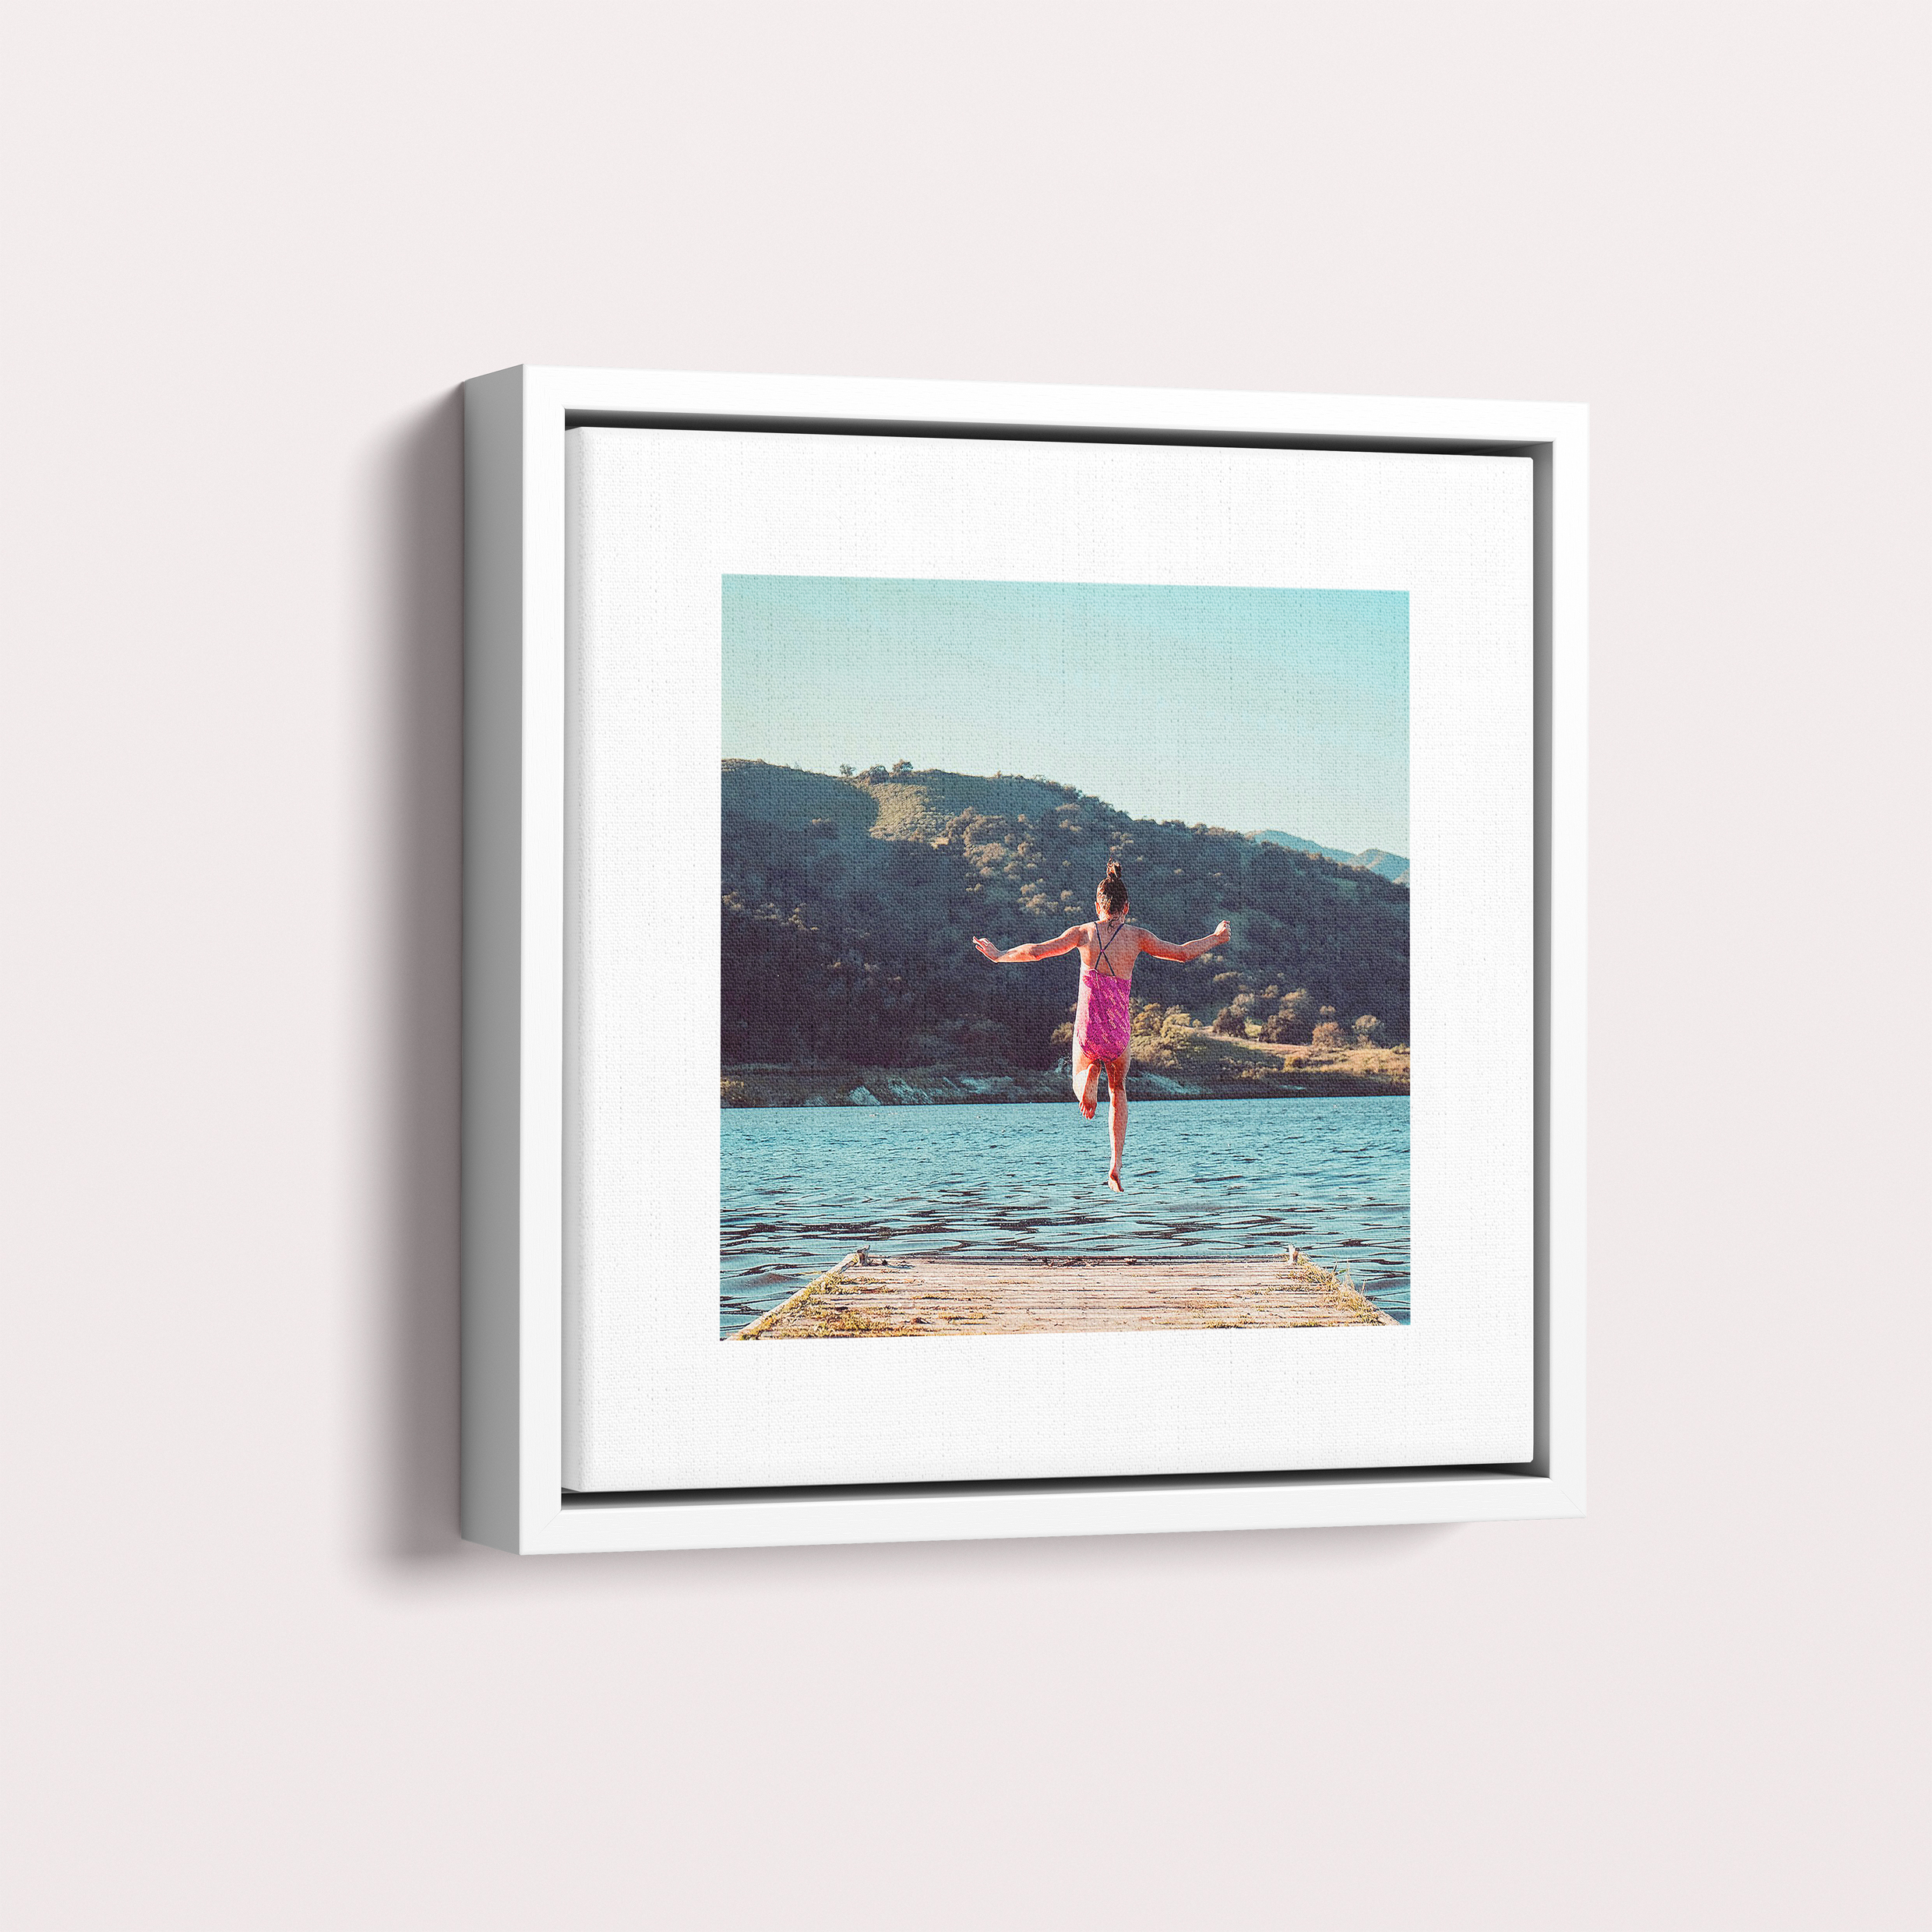  Personalized Stacked Framed Photo Canvas - Showcase your cherished memories with this portrait-oriented canvas featuring the uniqueStacked design.